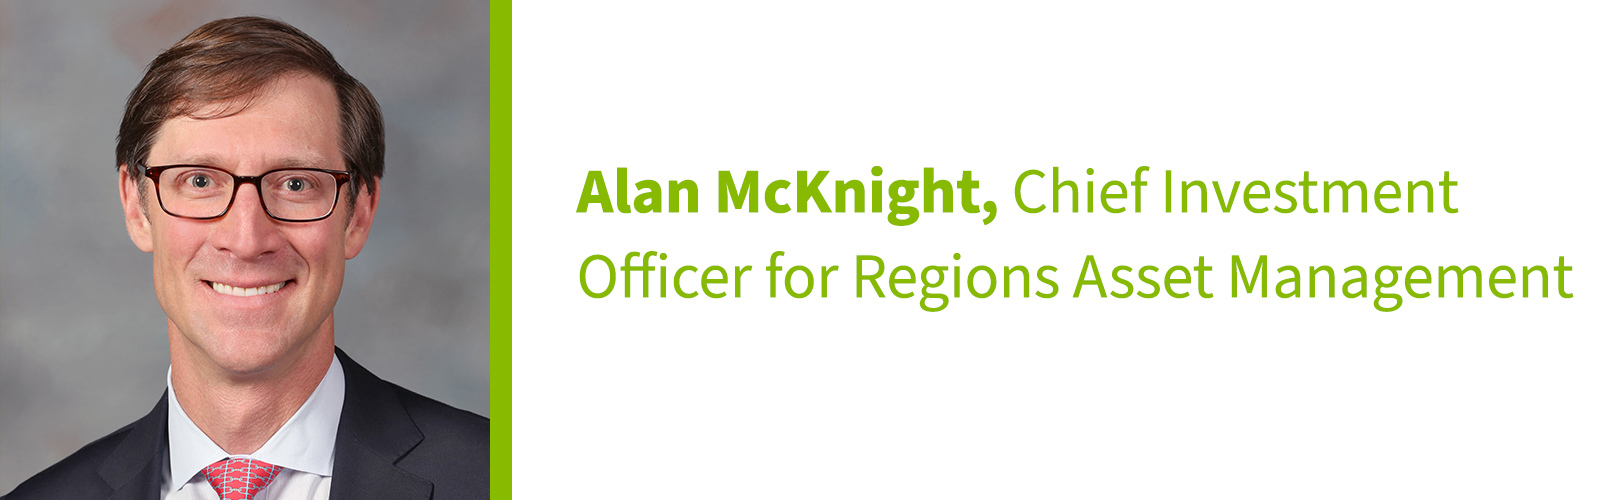 Alan McKnight, Chief Investment Officer for Regions Asset Management